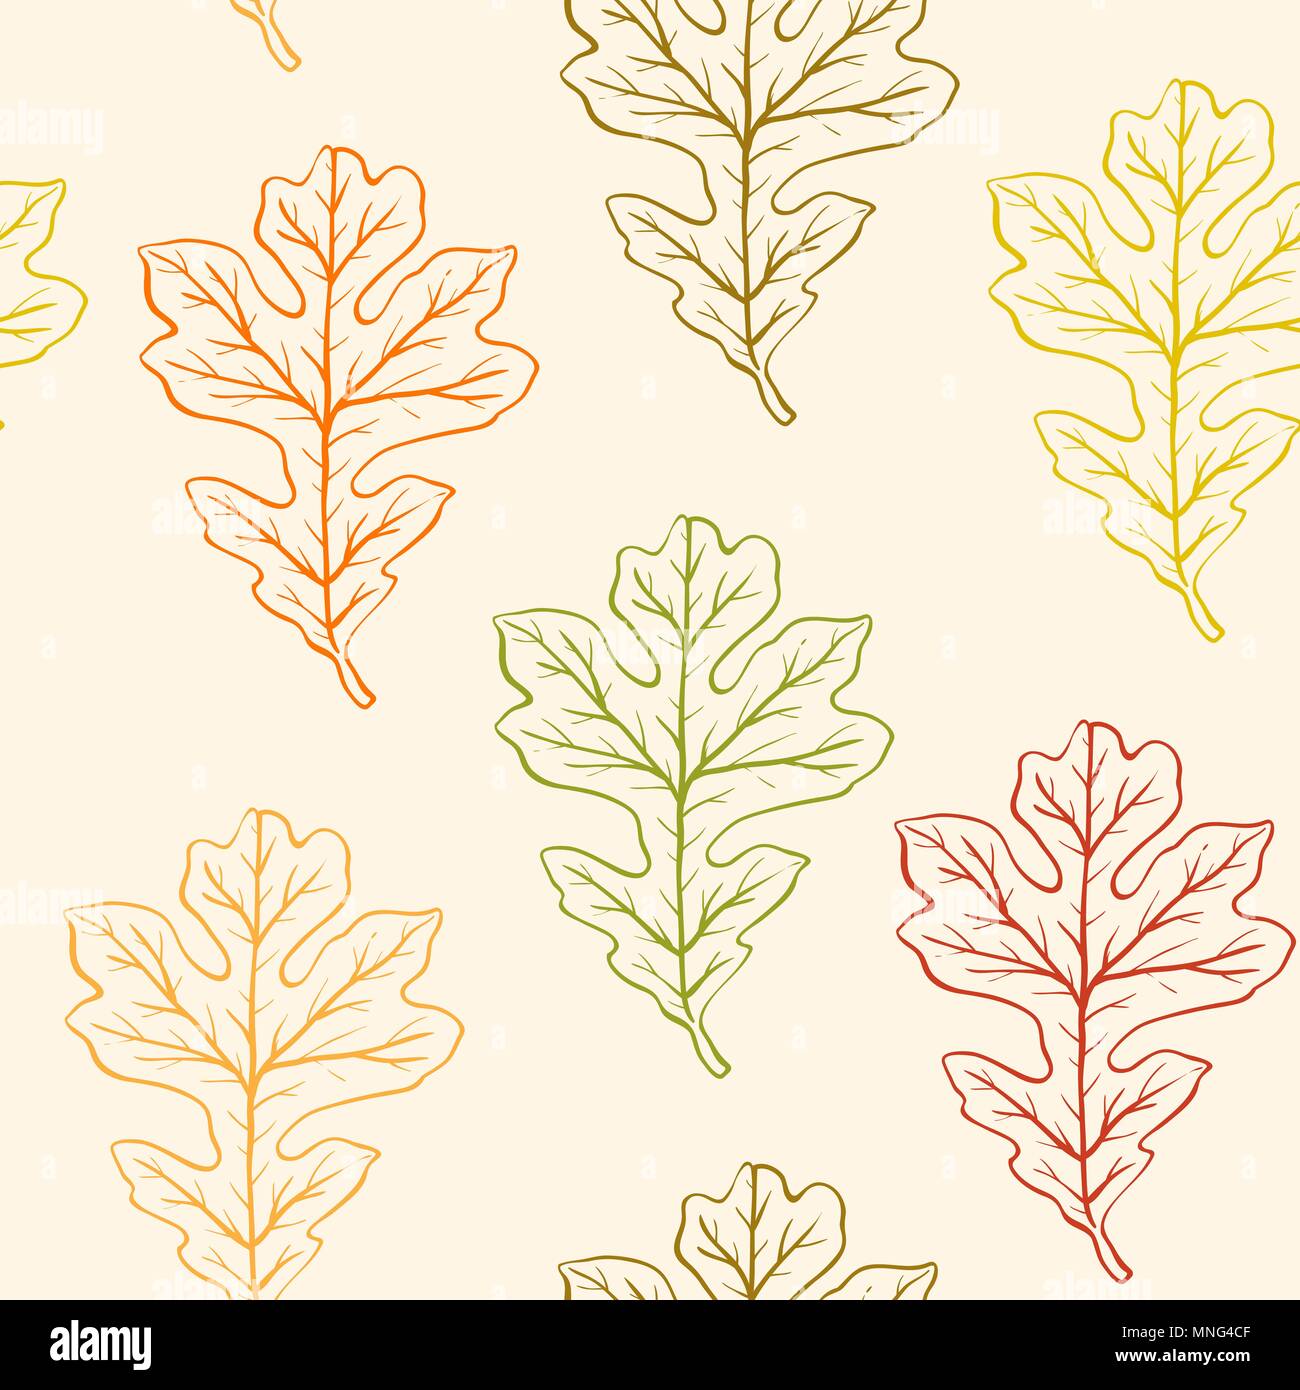 Vector autumn seamless pattern with oak leaves Stock Vector